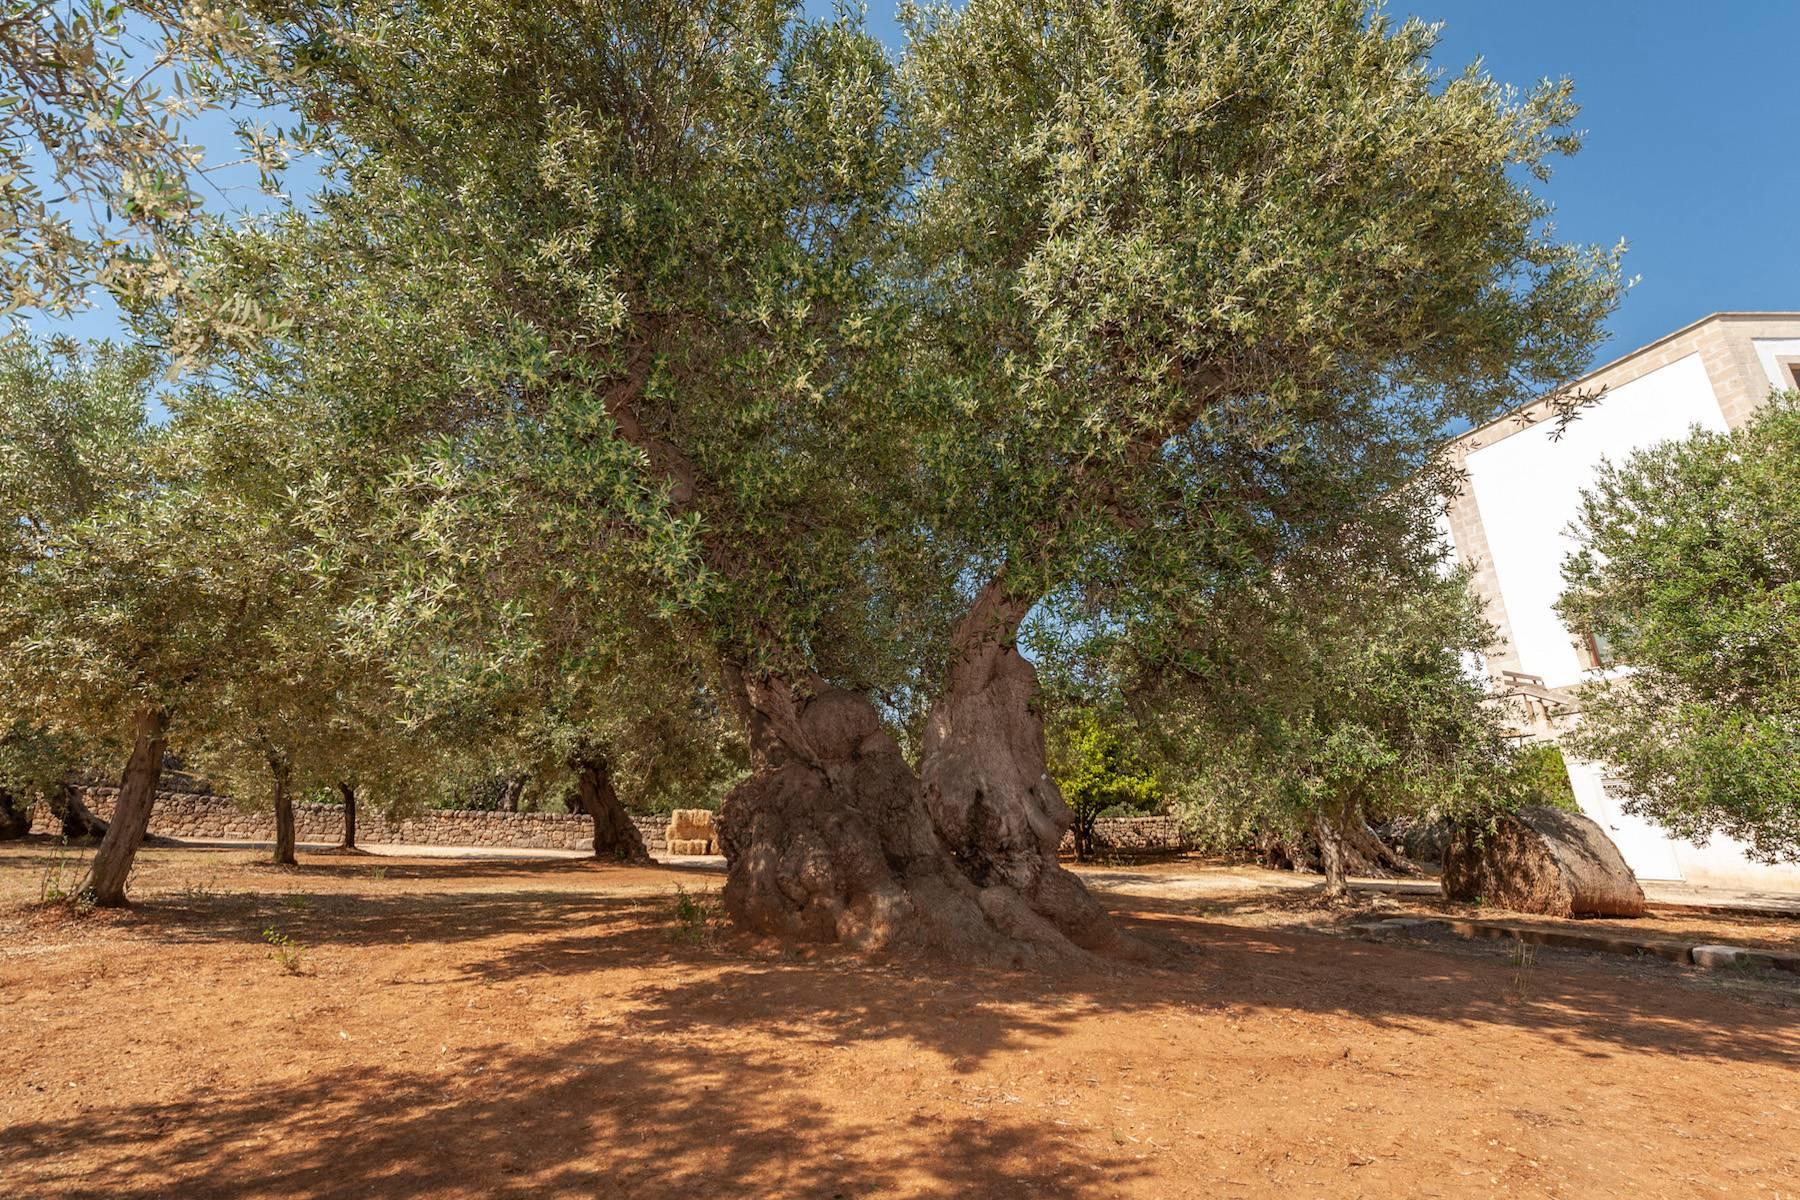 Charming 18th century Masseria surrounded by centuries-old olive trees - 32